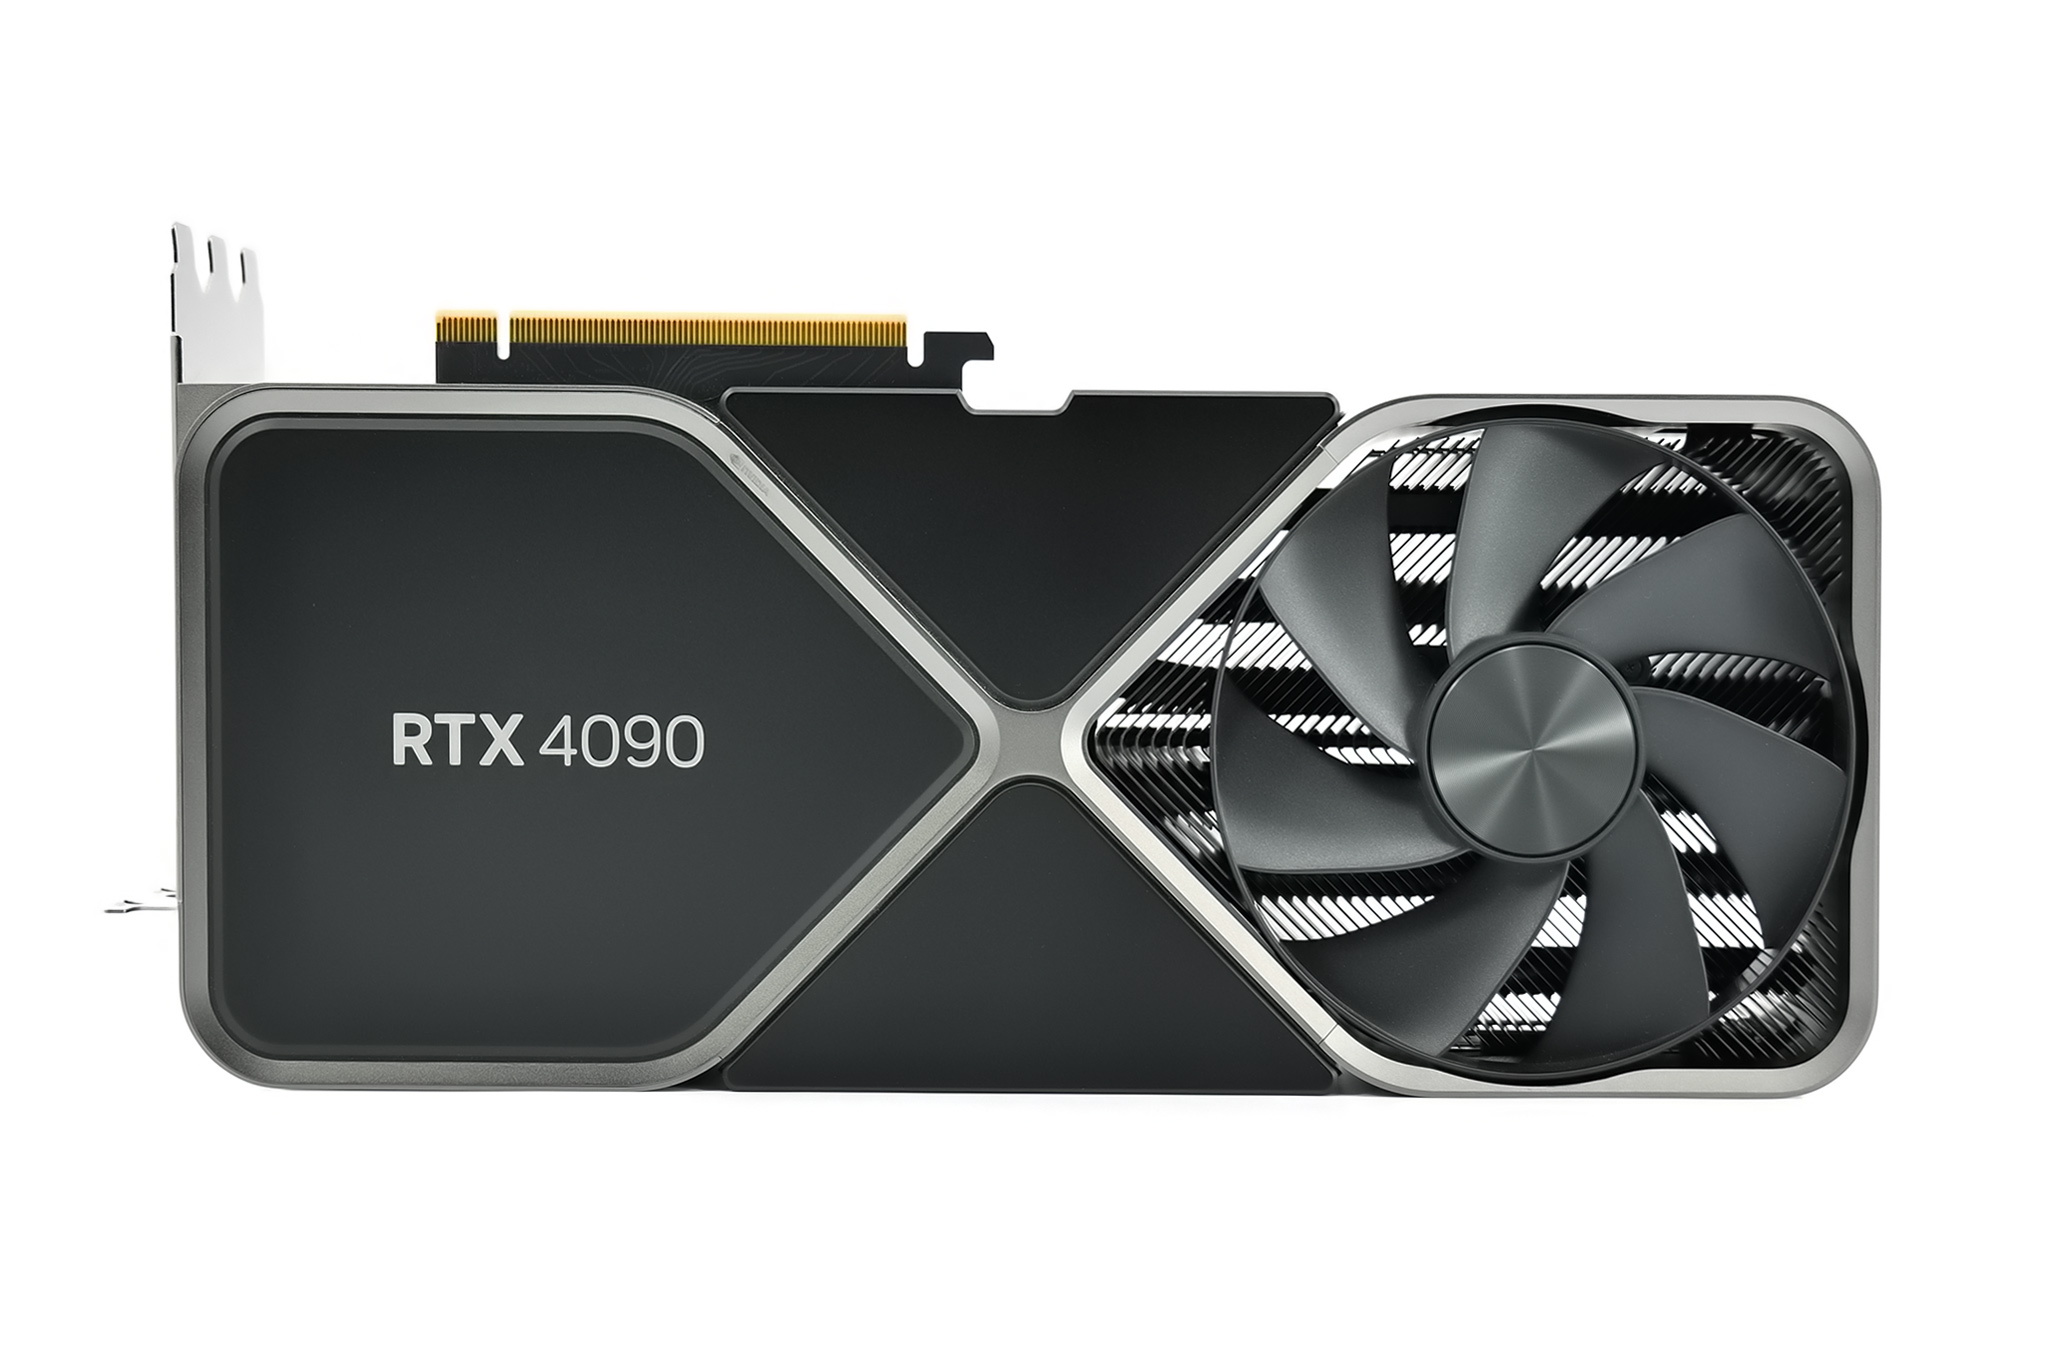 Geforce rtx 4090 ti. RTX 4090 ti. RTX 4090 founders Edition. NVIDIA 4090 founders Edition. RTX 4090 Fan.